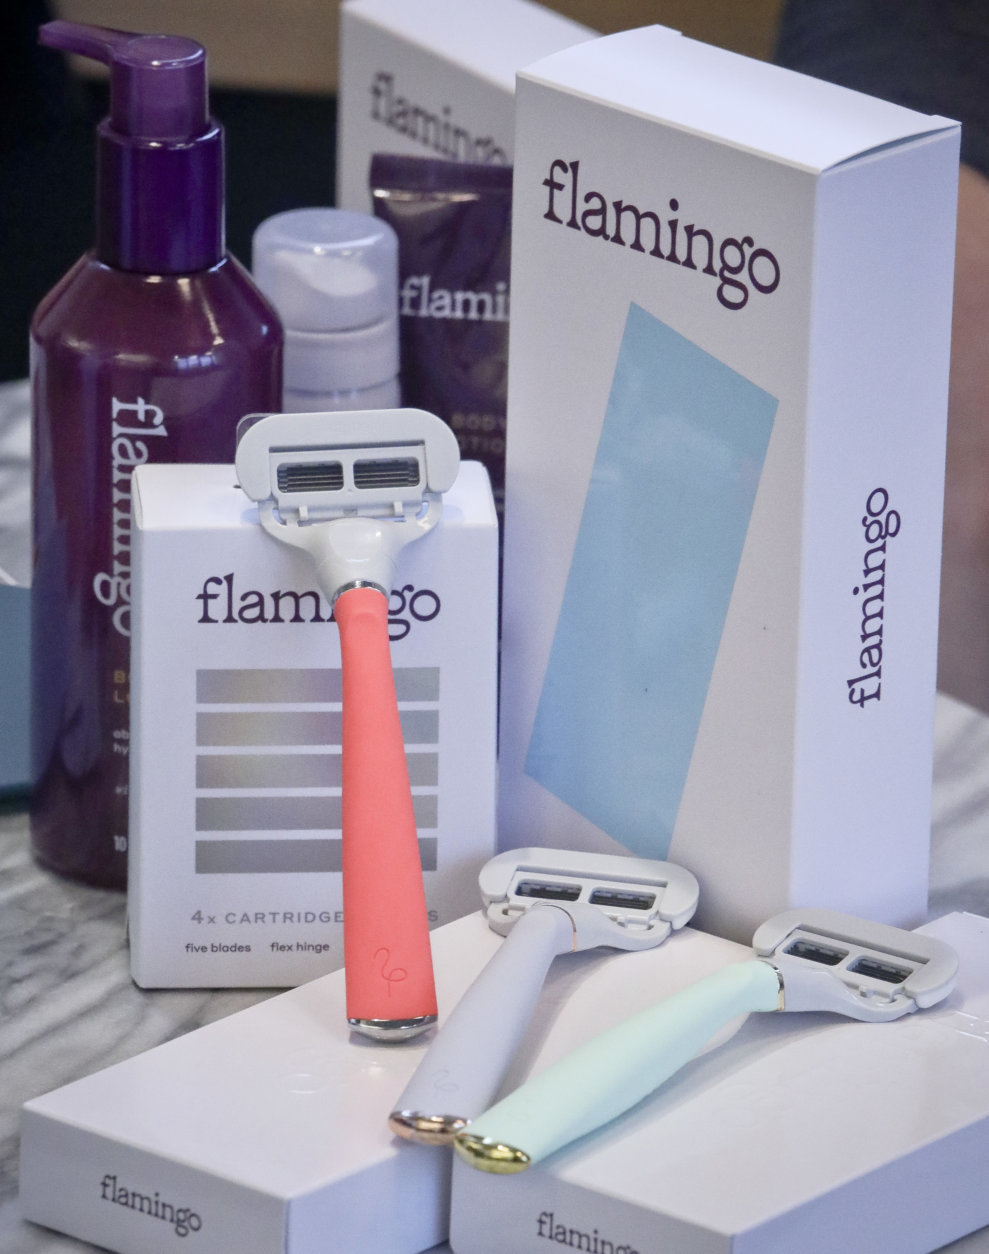 In this Thursday, Oct. 11, 2018, photo products from Harry's new shaving and body care brand Flamingo are displayed in New York. Flamingo, which launches Tuesday, Oct. 16, is a new direct-to-consumer hair removal and body care brand for women that aims to make women less uncomfortable about shaving. “This category has been historically very taboo,” said Allie Melnick, the general manager for Flamingo. (AP Photo/Bebeto Matthews)